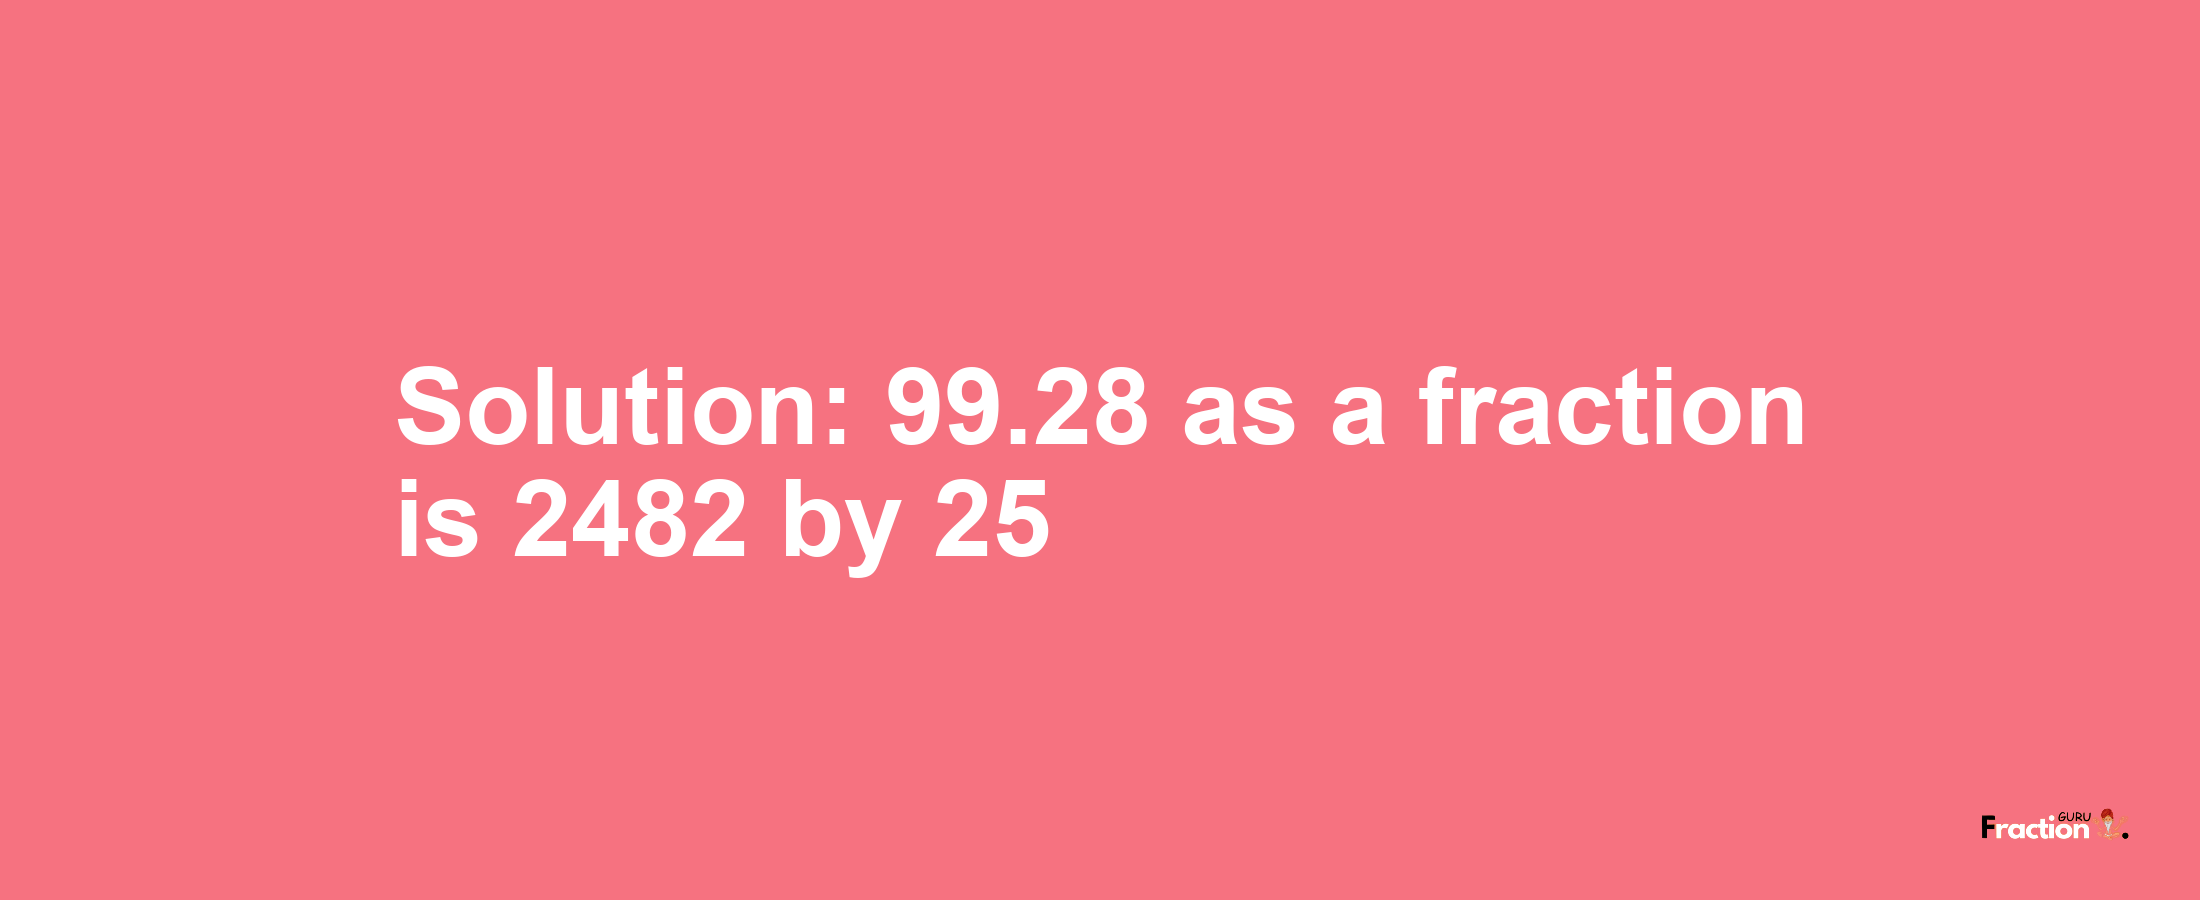 Solution:99.28 as a fraction is 2482/25